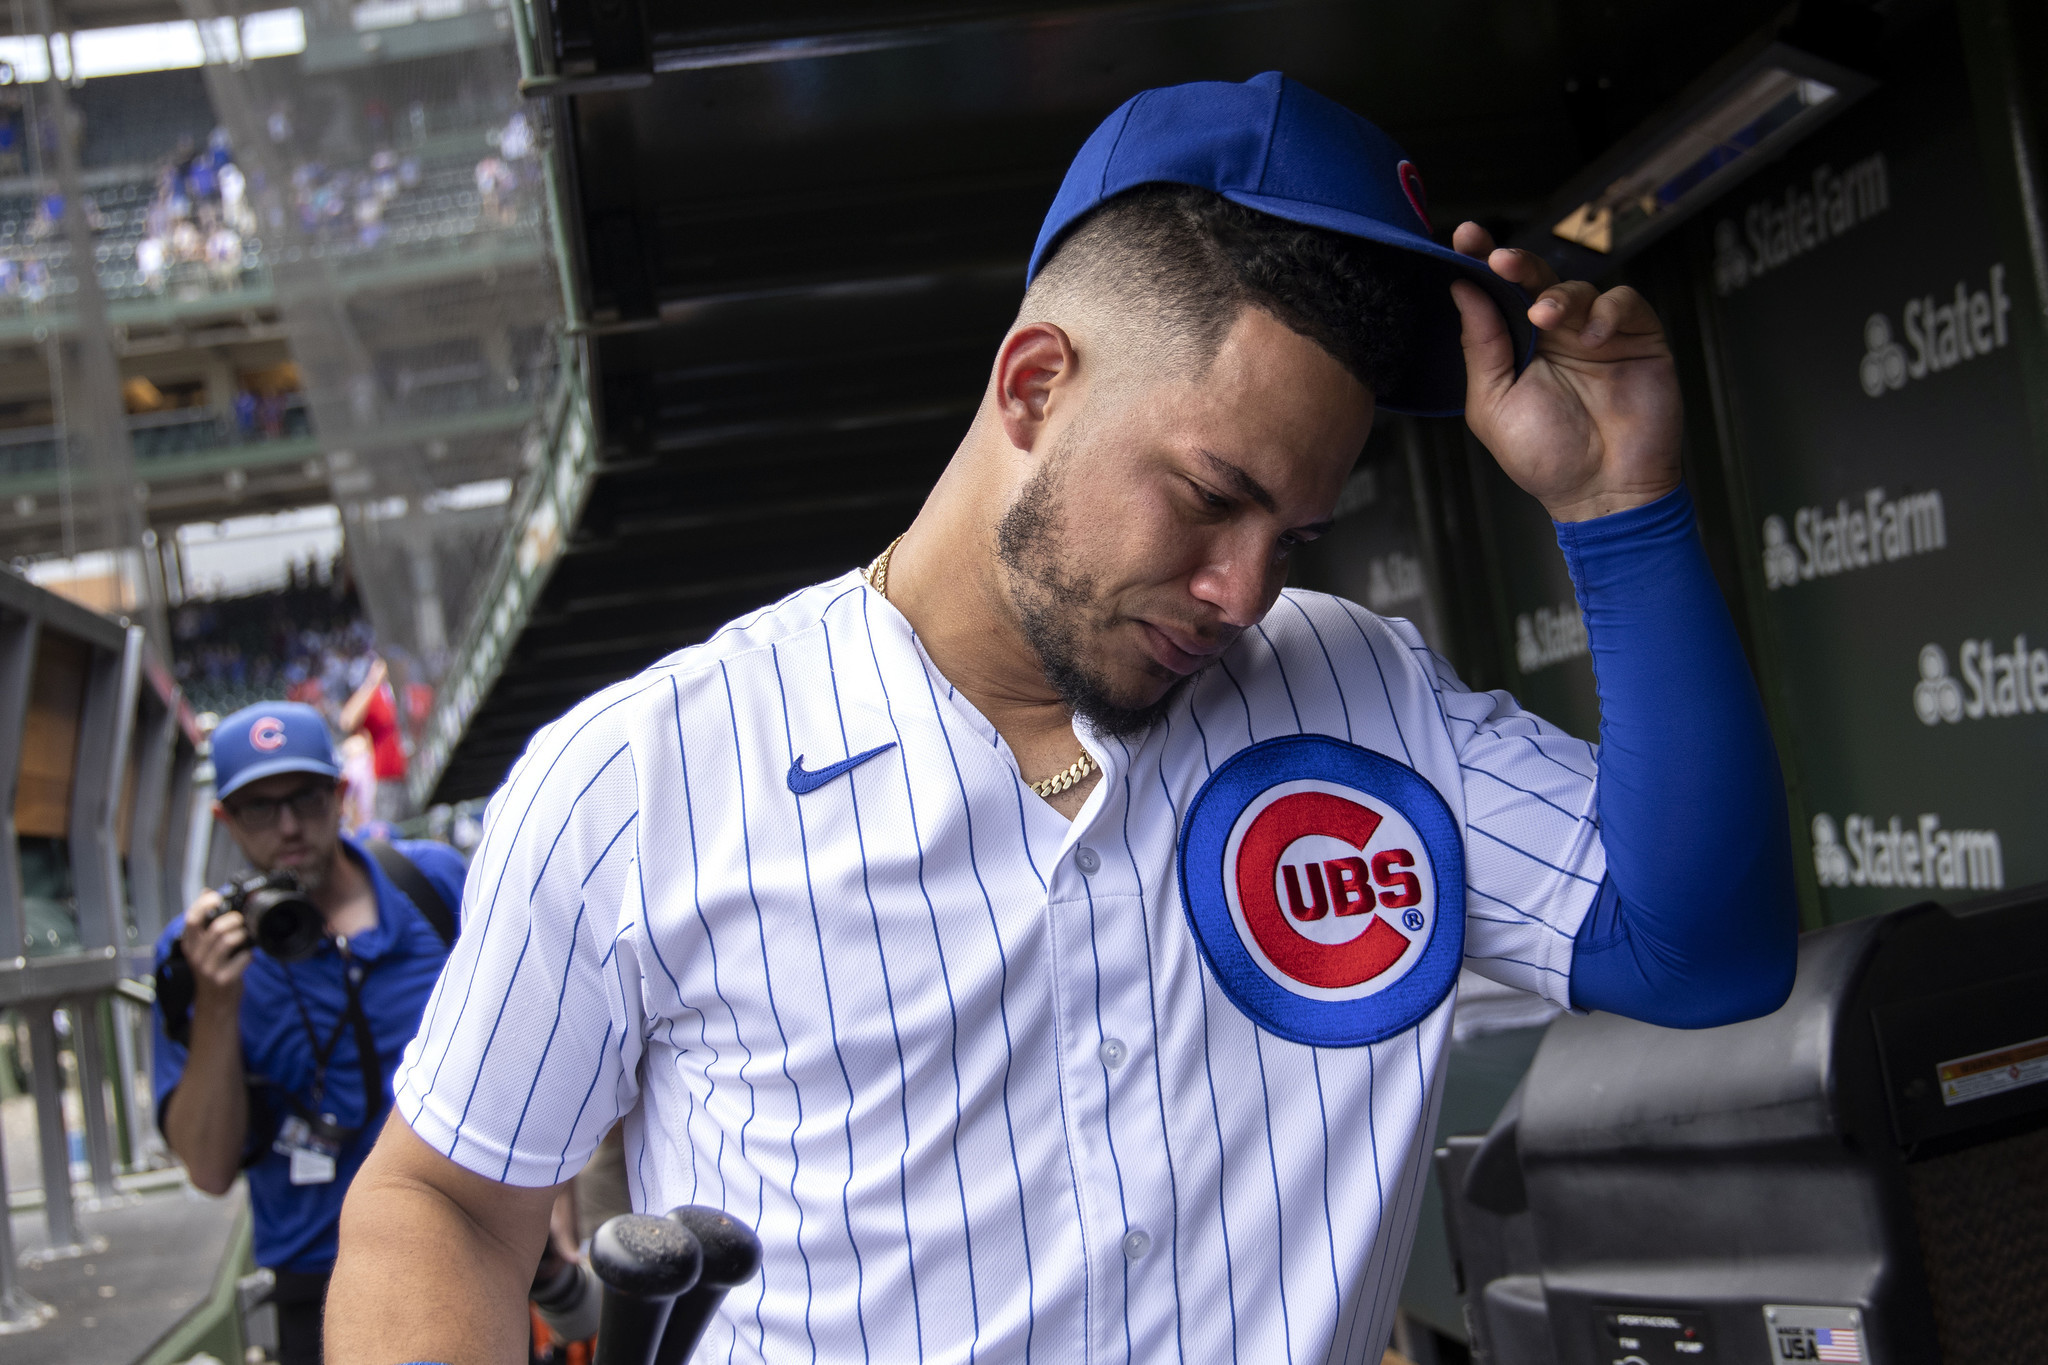 Column: Willson Contreras does his part for Chicago Cubs